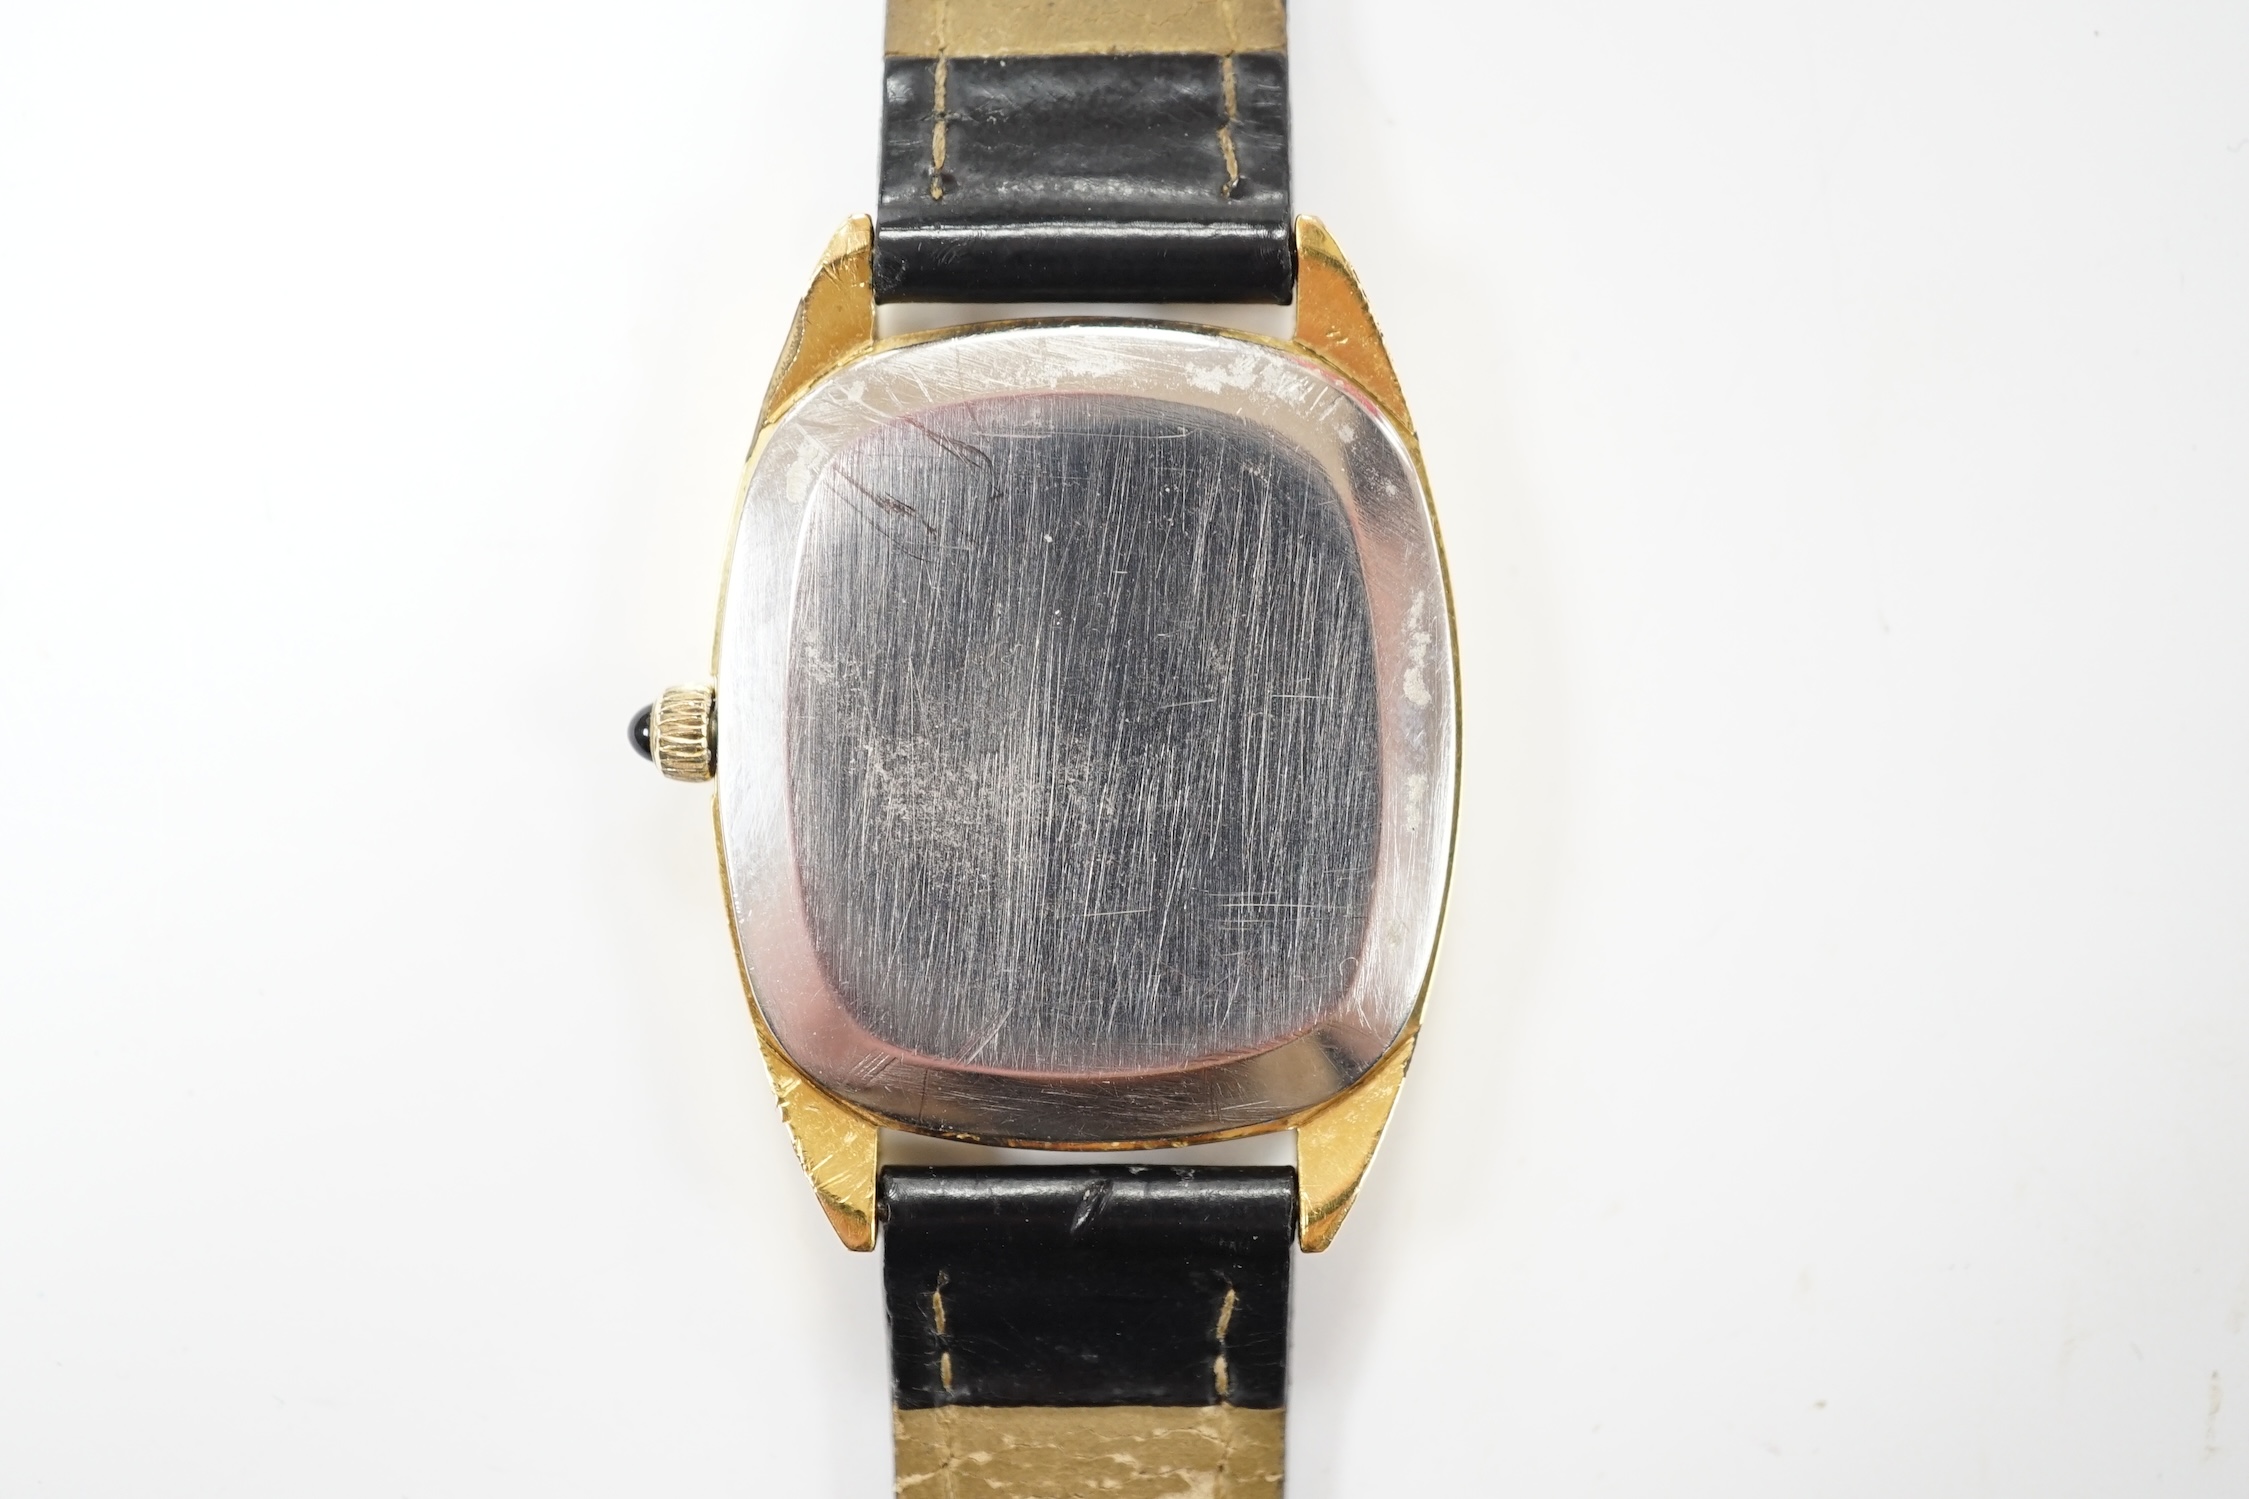 A gentleman's steel and gold plated Omega De Ville manual wind dress wrist watch, with oval Roman dial, on a leather strap, with gold plated Omega buckle, case diameter 30mm, no box or papers. Fair condition.